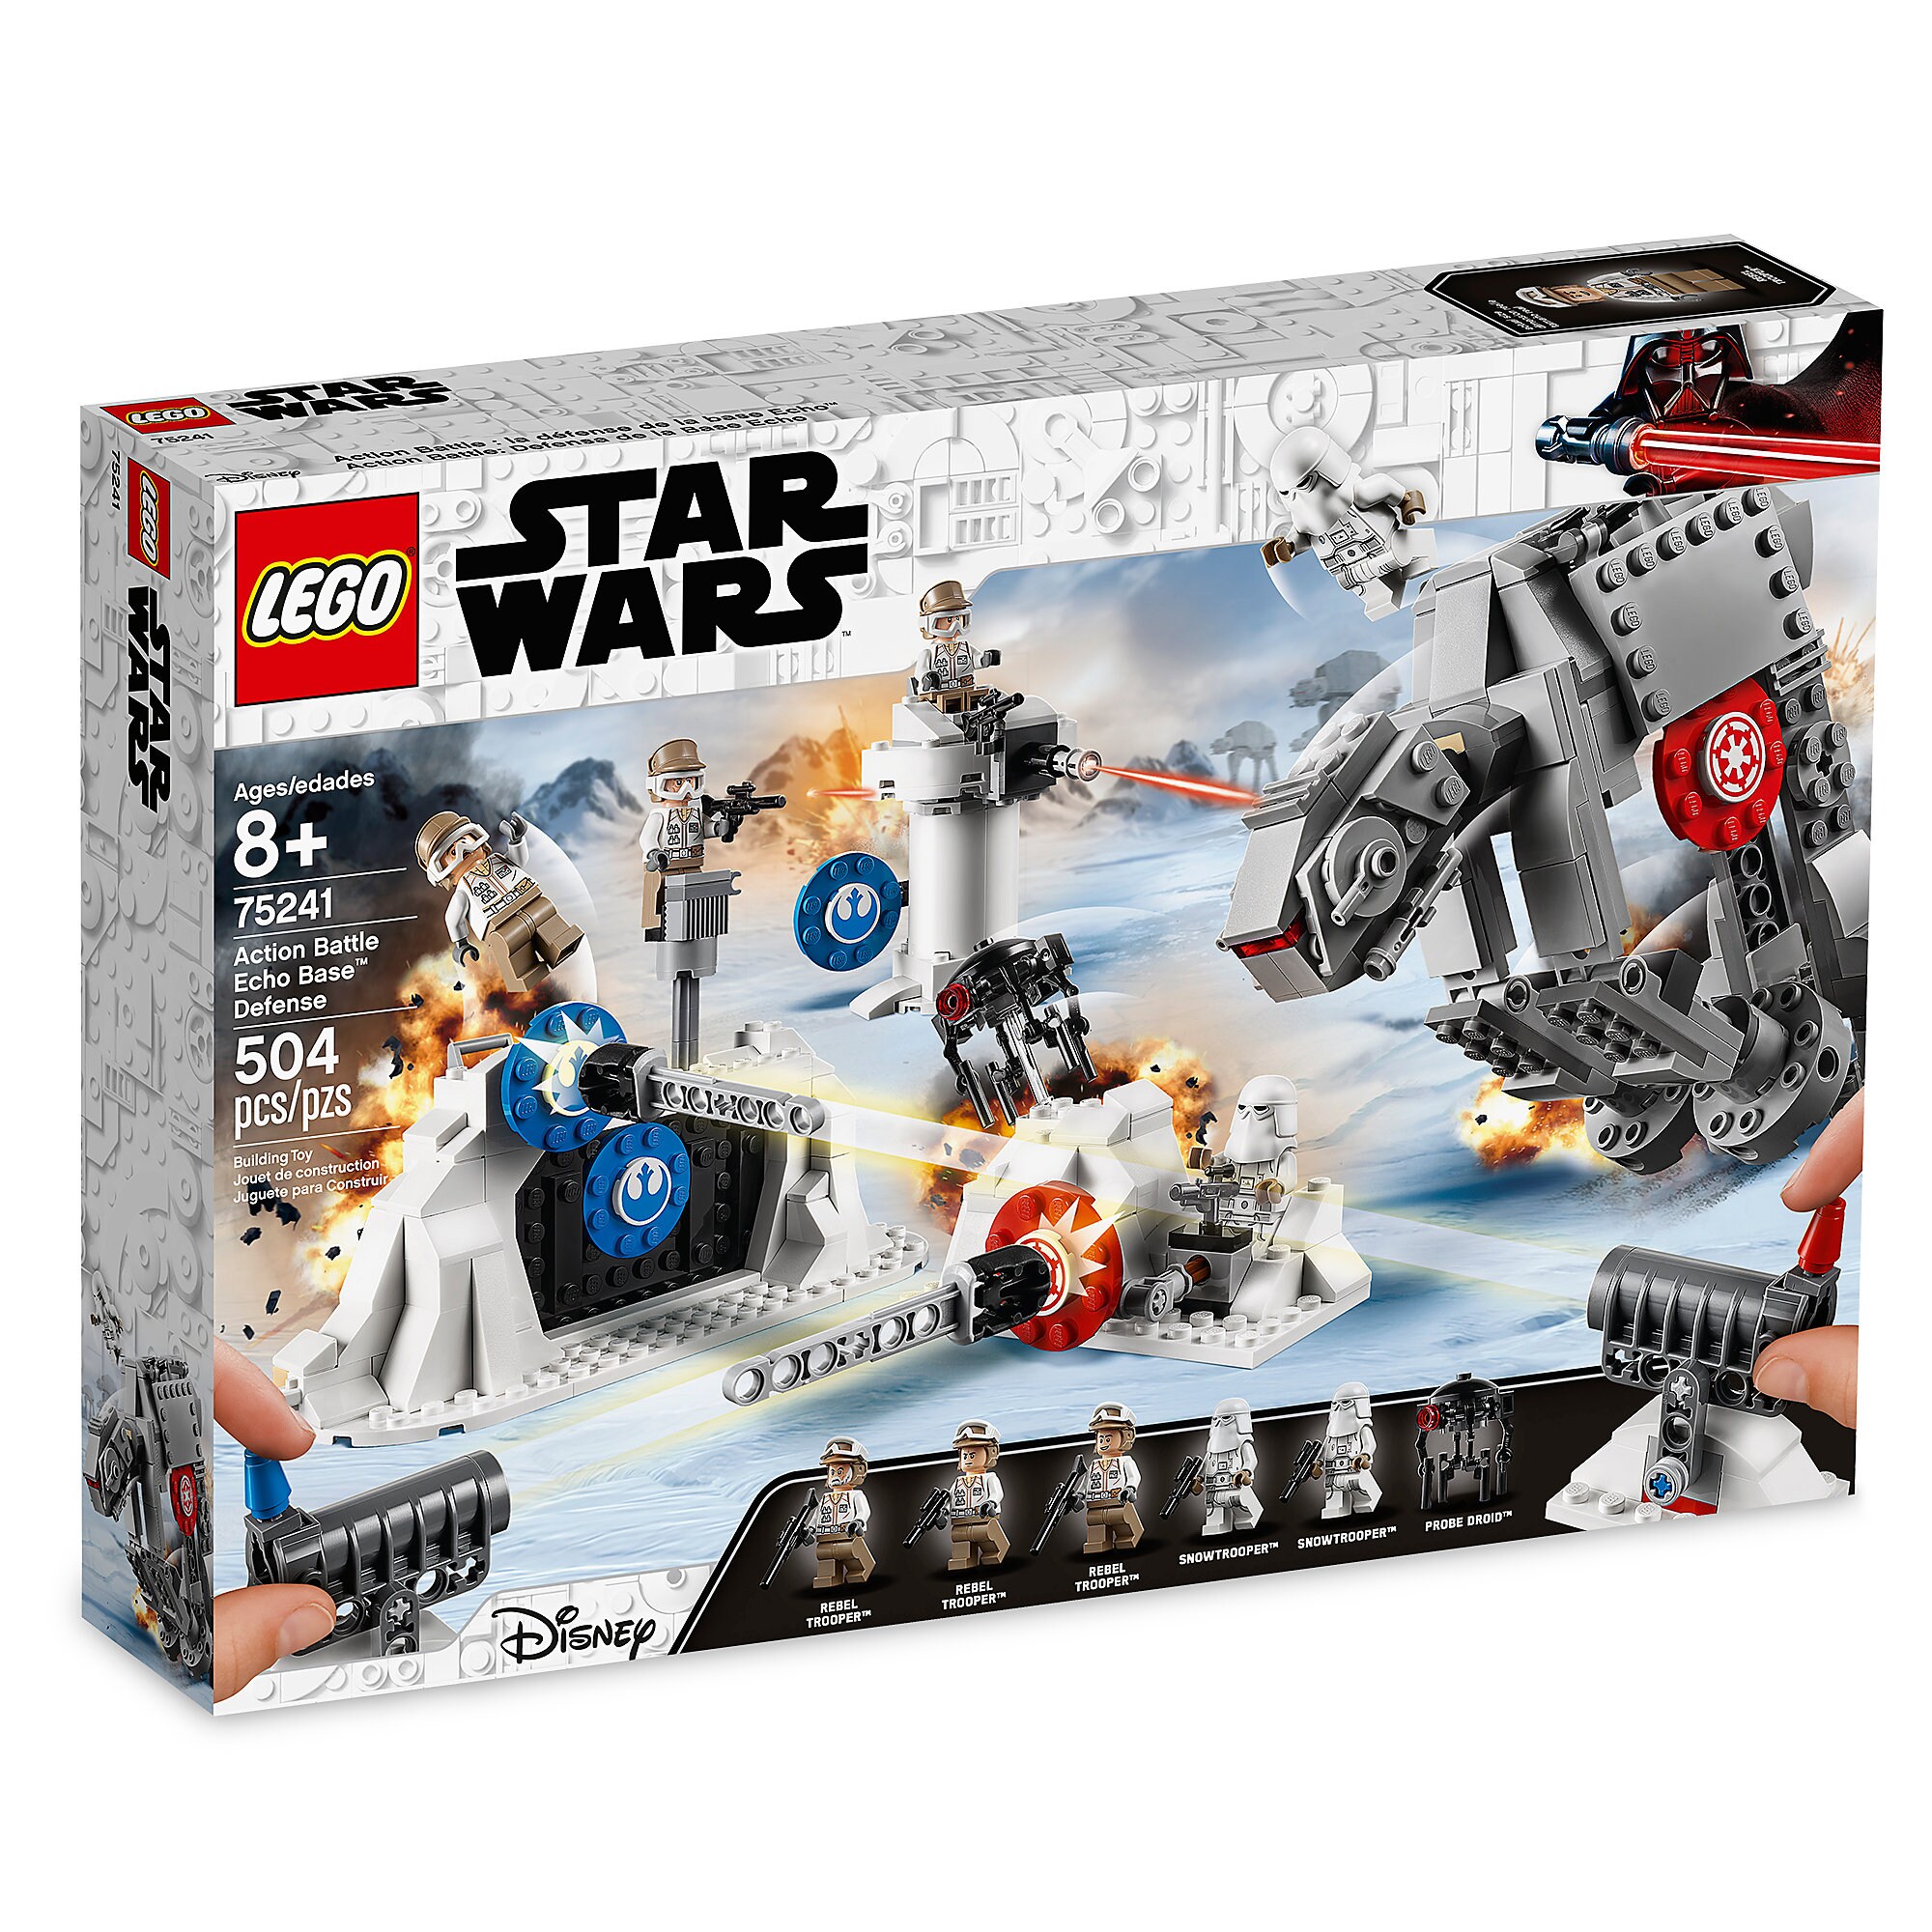 Action Battle Echo Base Defense Play Set by LEGO - Star Wars: The Empire Strikes Back